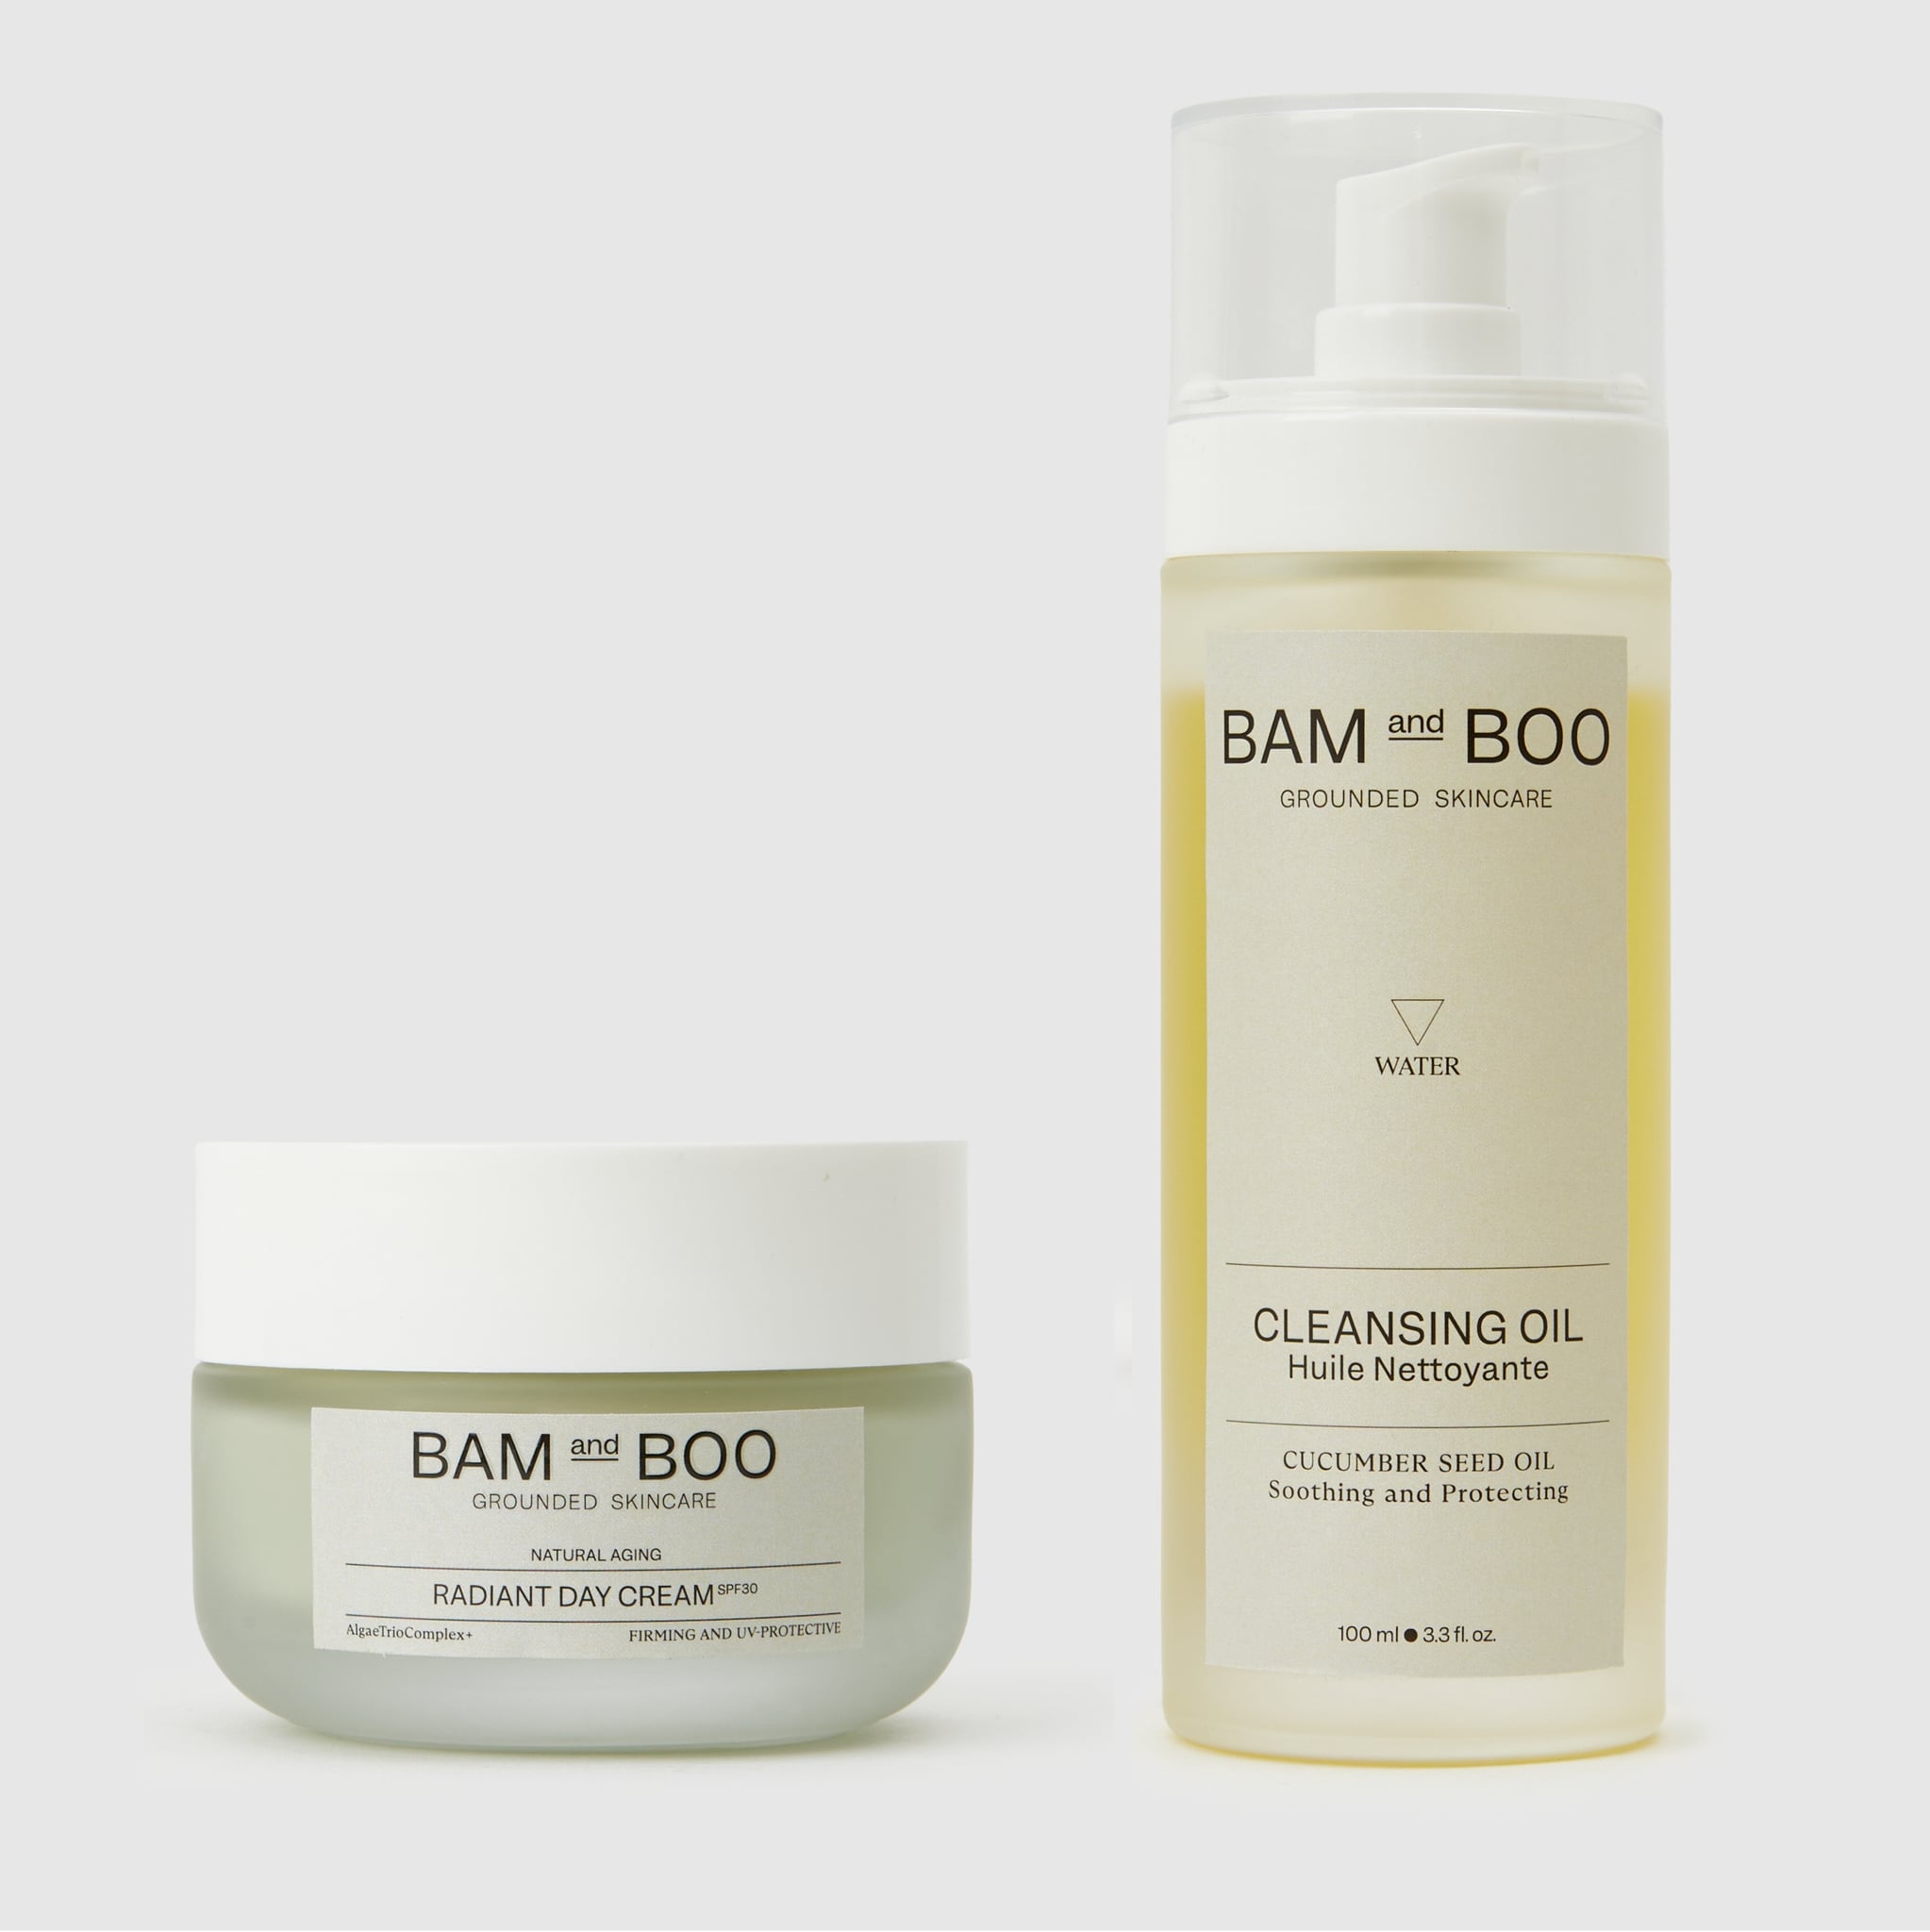 Radiant Cream and Cleansing Oil Set - BAMandBOO Grounded Skincare Azores